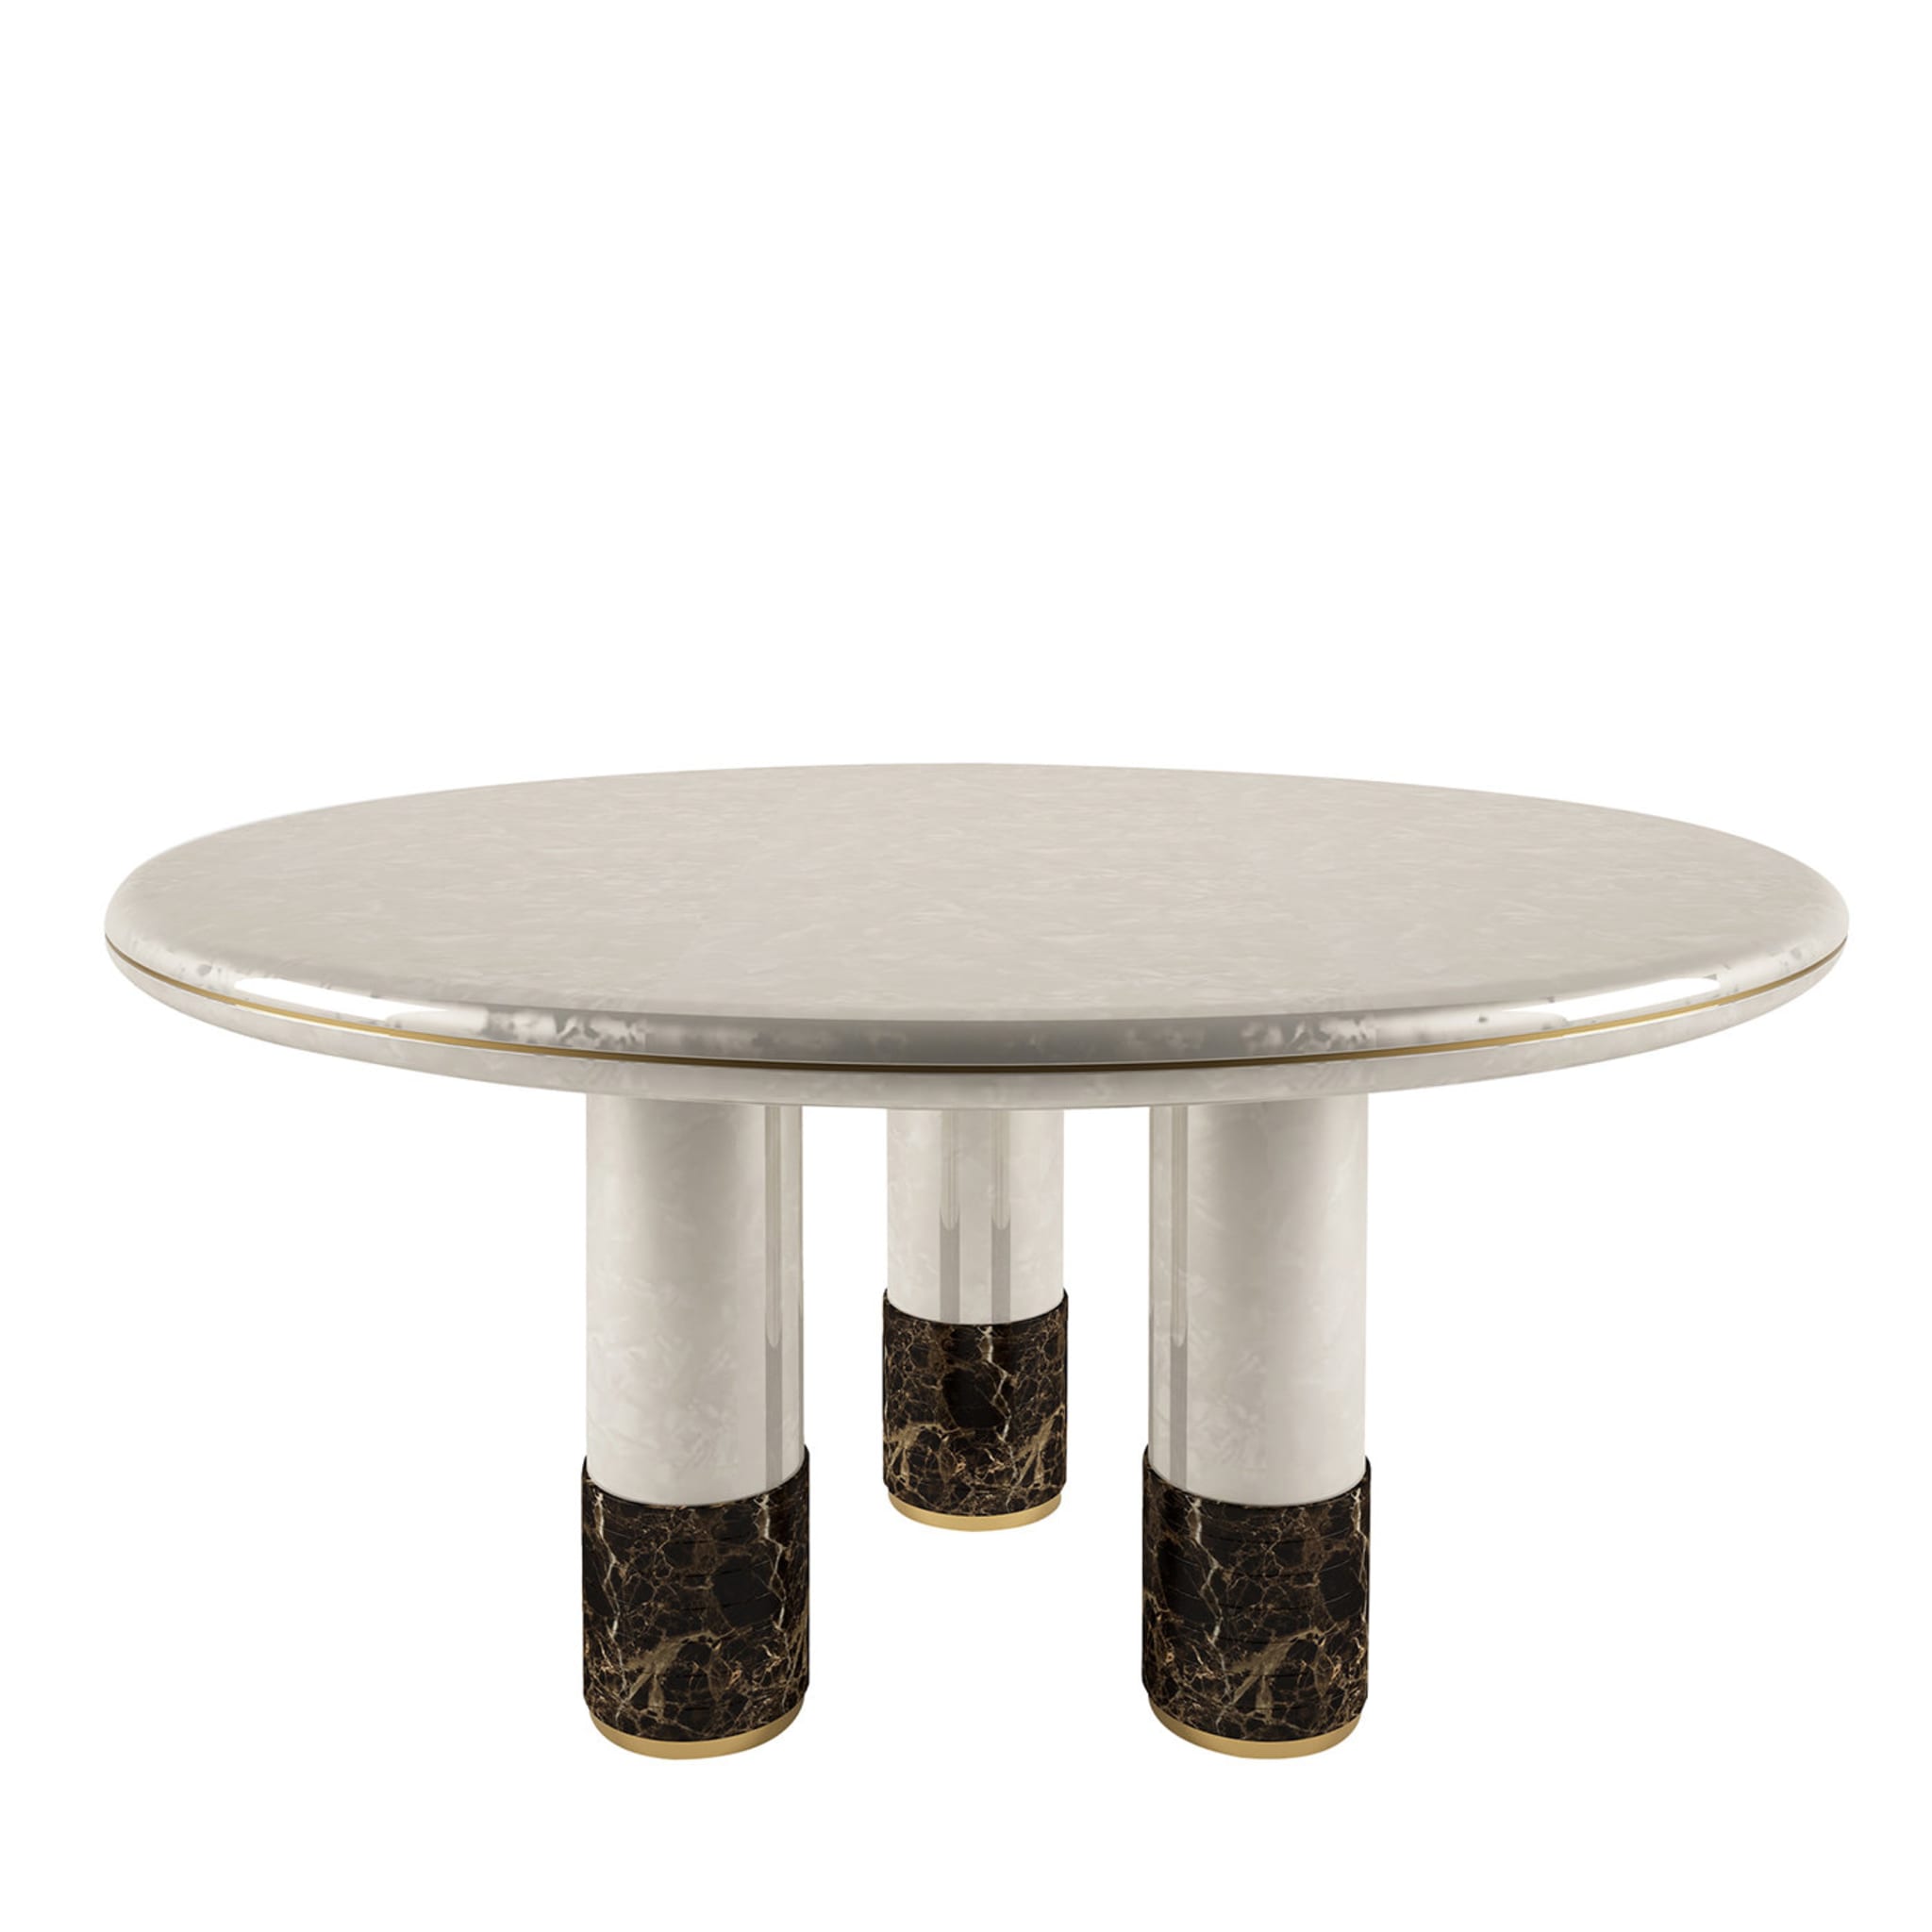 Venice Round Dining Table by Valerio Andriani - Main view